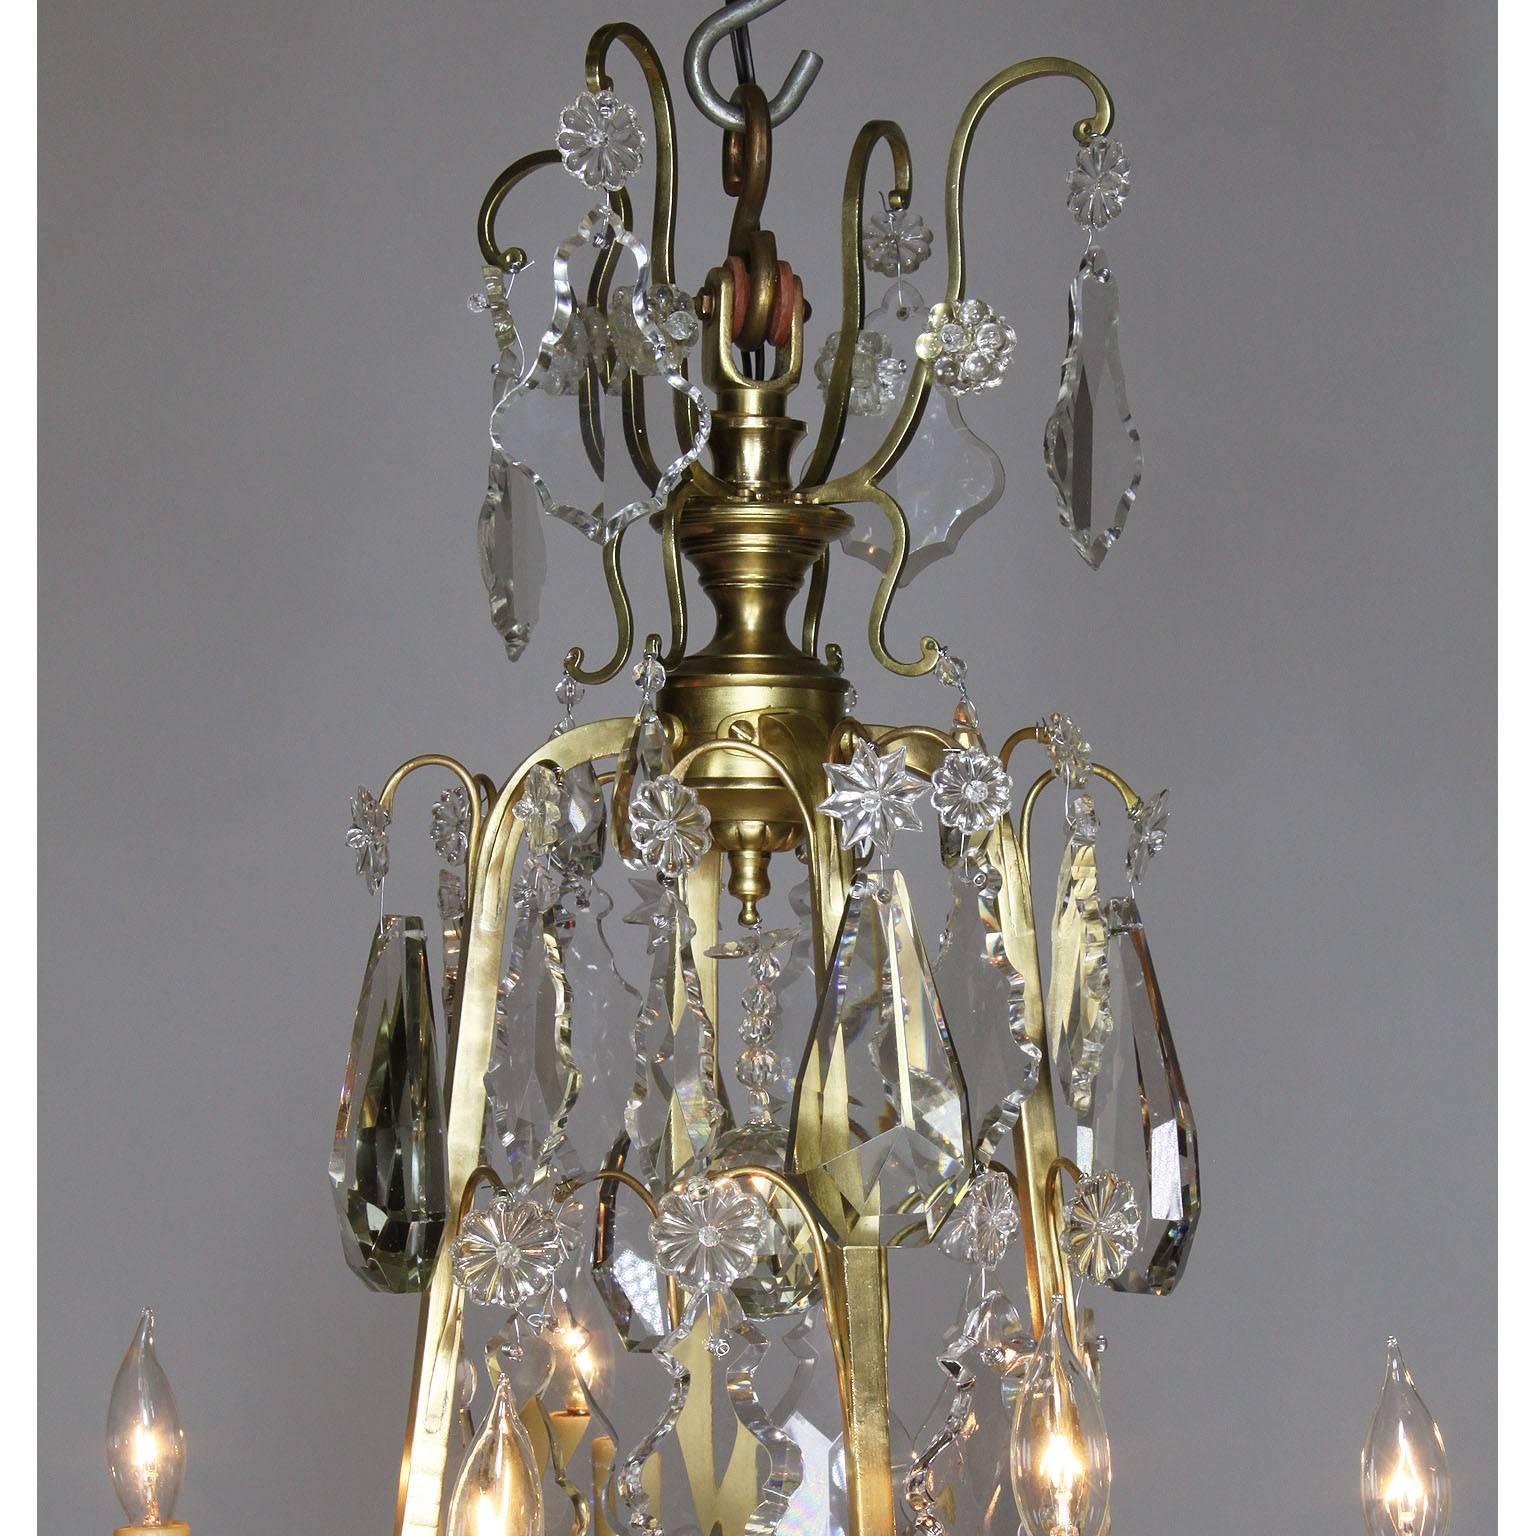 A fine French Louis XV style gilt bronze and cut-glass nine-light chandelier. The elongated body with cut-glass (crystal) pendants surmounted with eight candle arms and a centre frosted glass shade, circa 1900.

Measures: Height: 44 inches (11.8